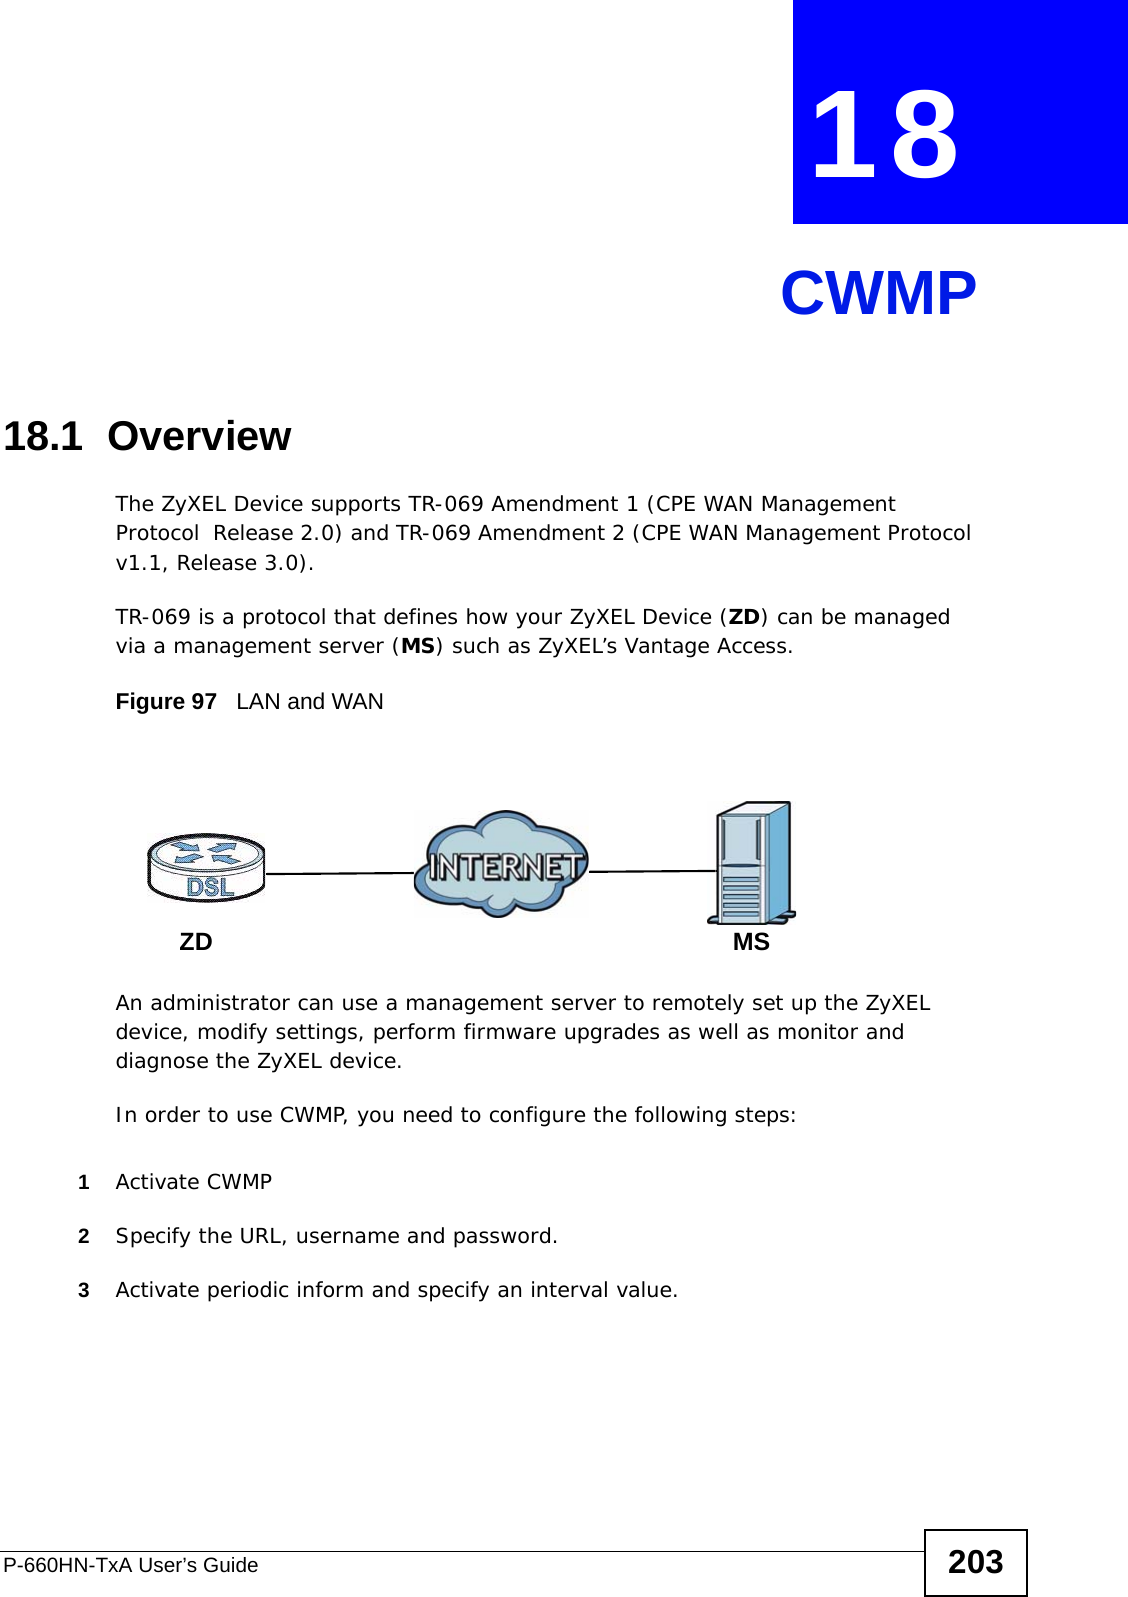 P-660HN-TxA User’s Guide 203CHAPTER  18 CWMP18.1  OverviewThe ZyXEL Device supports TR-069 Amendment 1 (CPE WAN Management Protocol  Release 2.0) and TR-069 Amendment 2 (CPE WAN Management Protocol v1.1, Release 3.0).TR-069 is a protocol that defines how your ZyXEL Device (ZD) can be managed via a management server (MS) such as ZyXEL’s Vantage Access. Figure 97   LAN and WANAn administrator can use a management server to remotely set up the ZyXEL device, modify settings, perform firmware upgrades as well as monitor and diagnose the ZyXEL device. In order to use CWMP, you need to configure the following steps:1Activate CWMP2Specify the URL, username and password.3Activate periodic inform and specify an interval value.MSZD